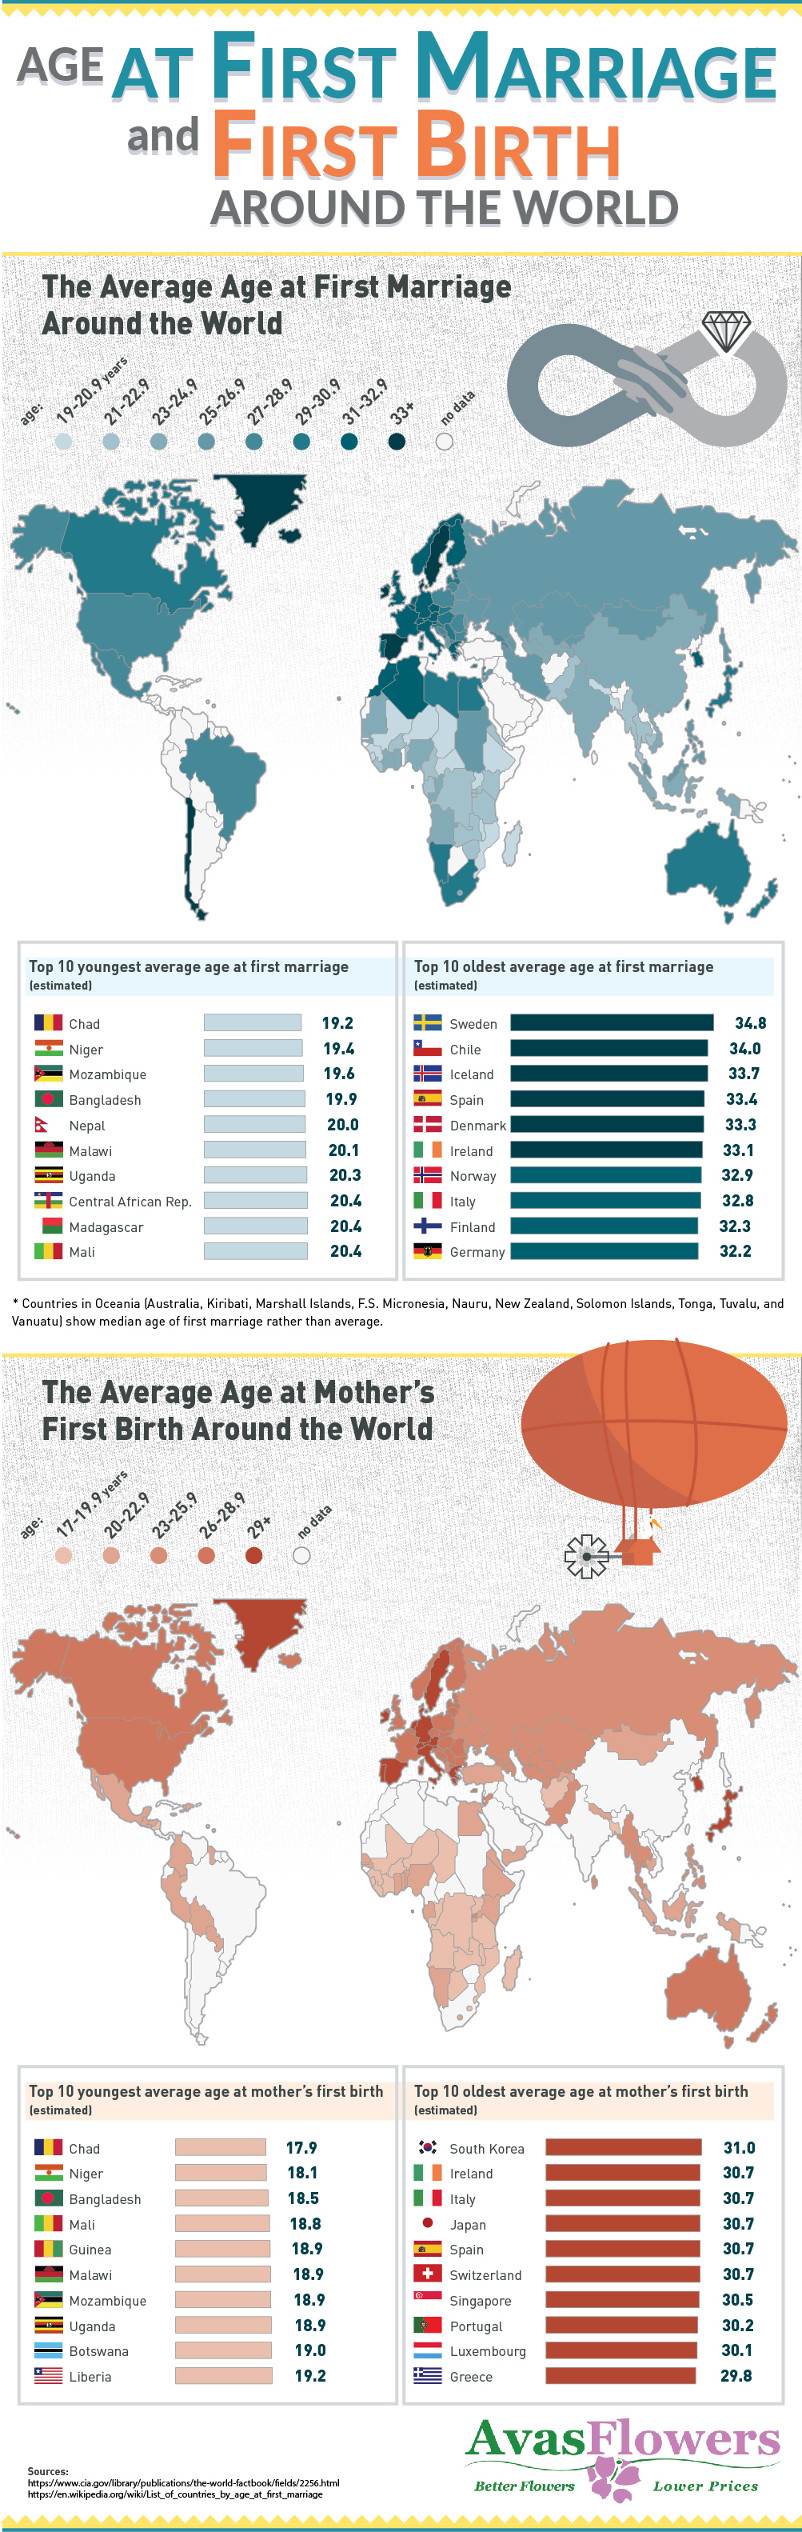 Age at First Marriage and First Birth Around the World